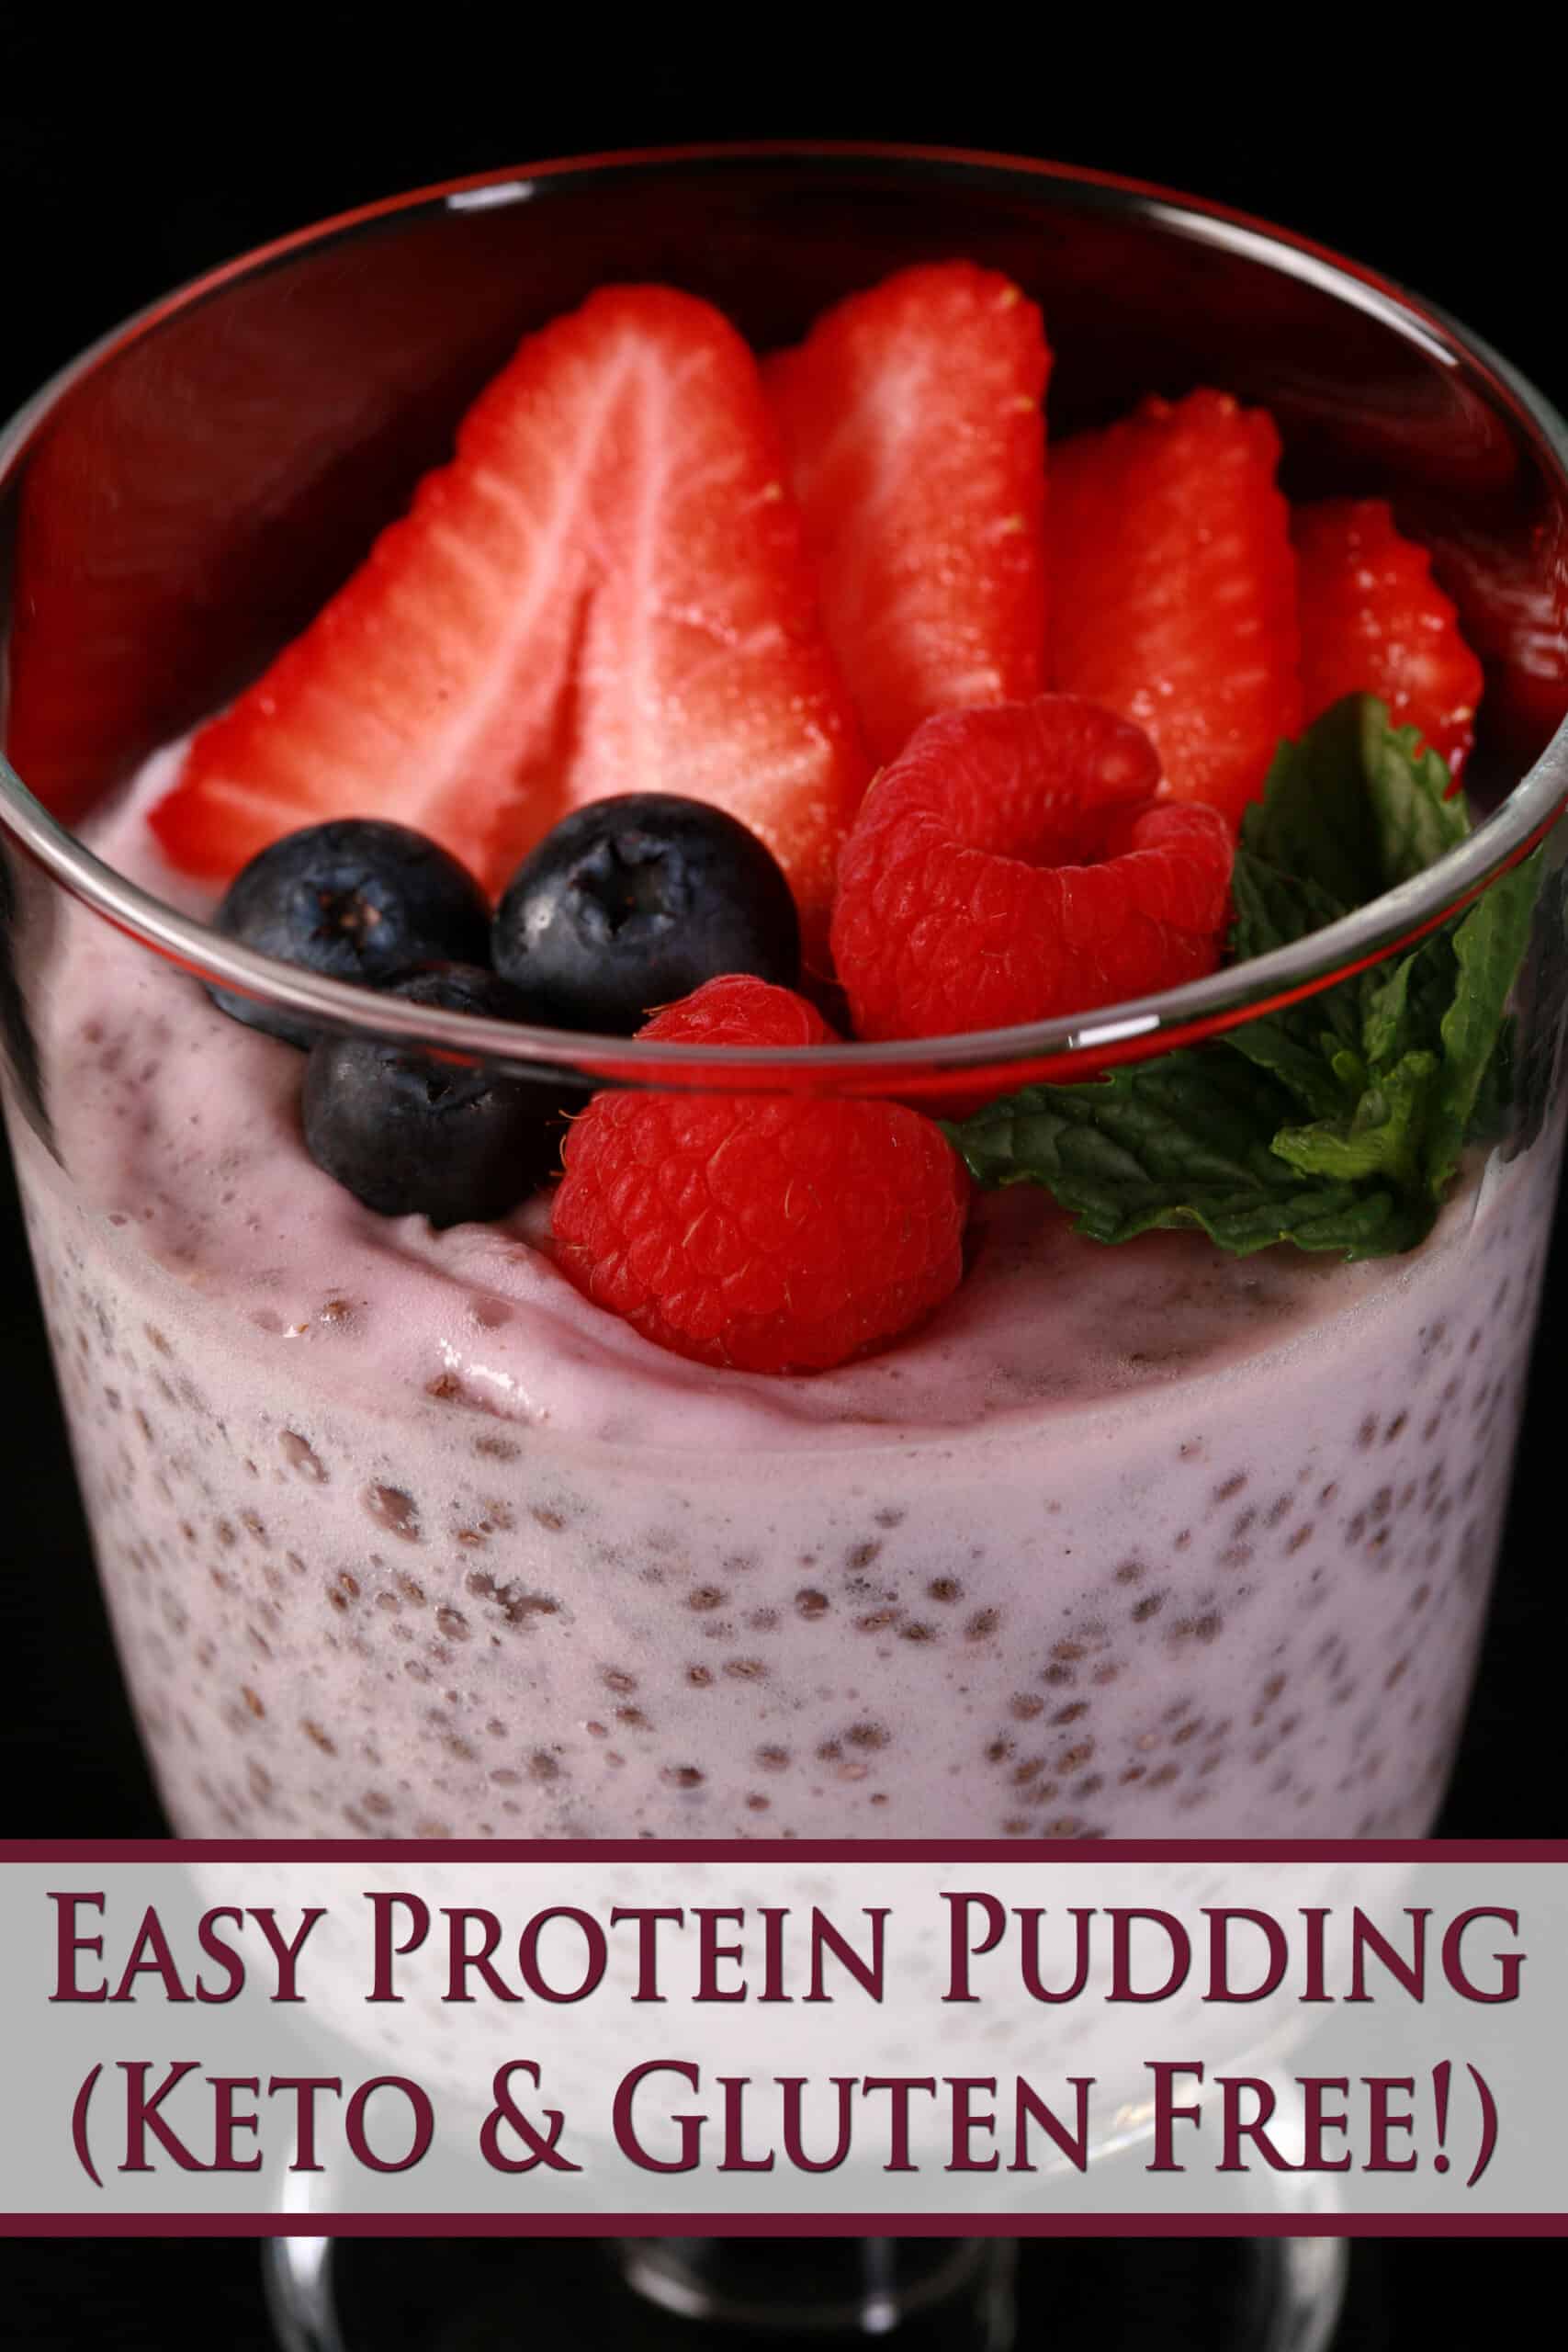 A glass of pink pudding, topped with berries Red text says easy protein pudding keto and gluten free.